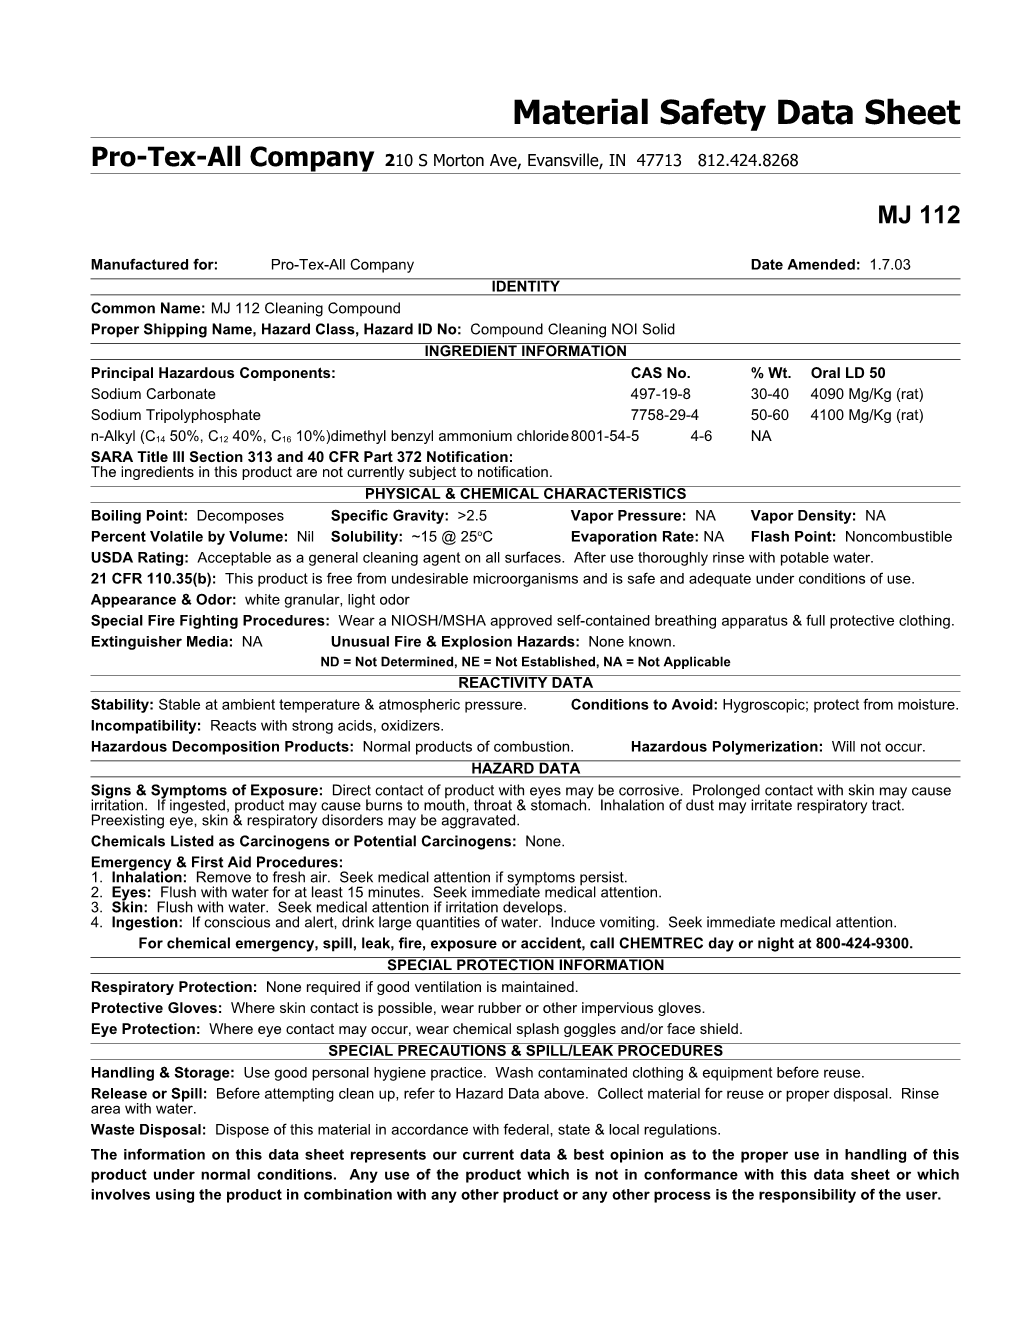 Material Safety Data Sheet s112